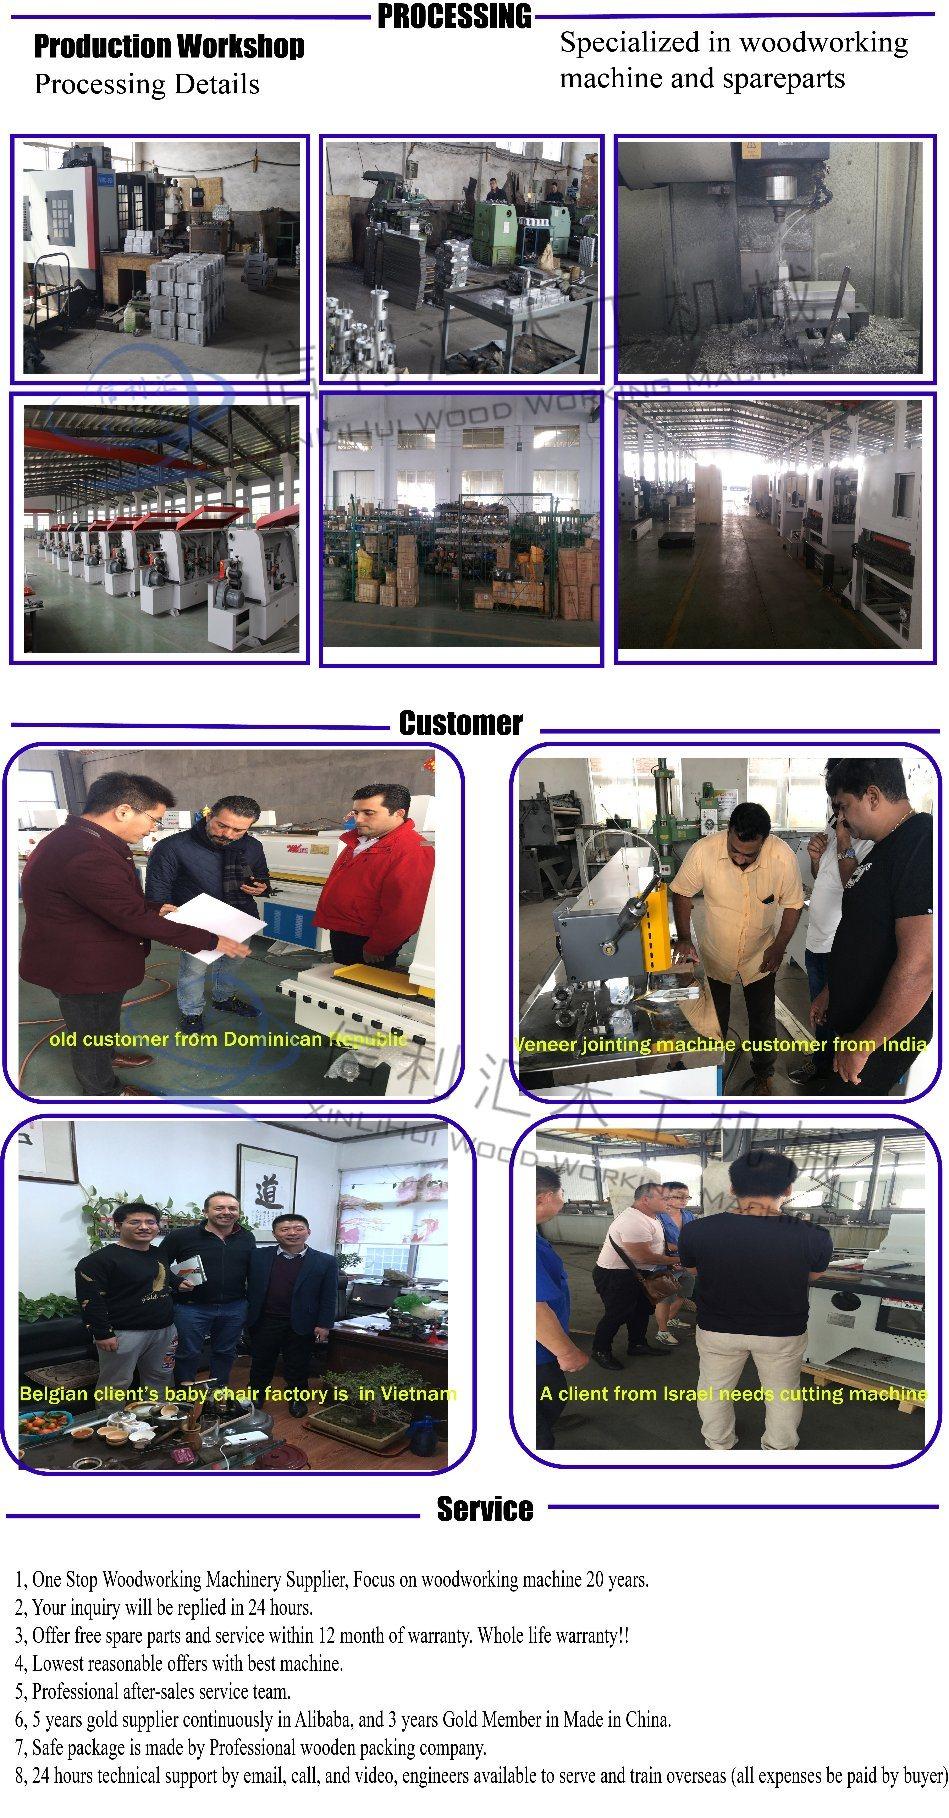 Specializing in The Production of Pallet Panels, Automatic Chamfering Machine, Automatic Edge-Cutting Machine, Factory Direct Sales, High Quality